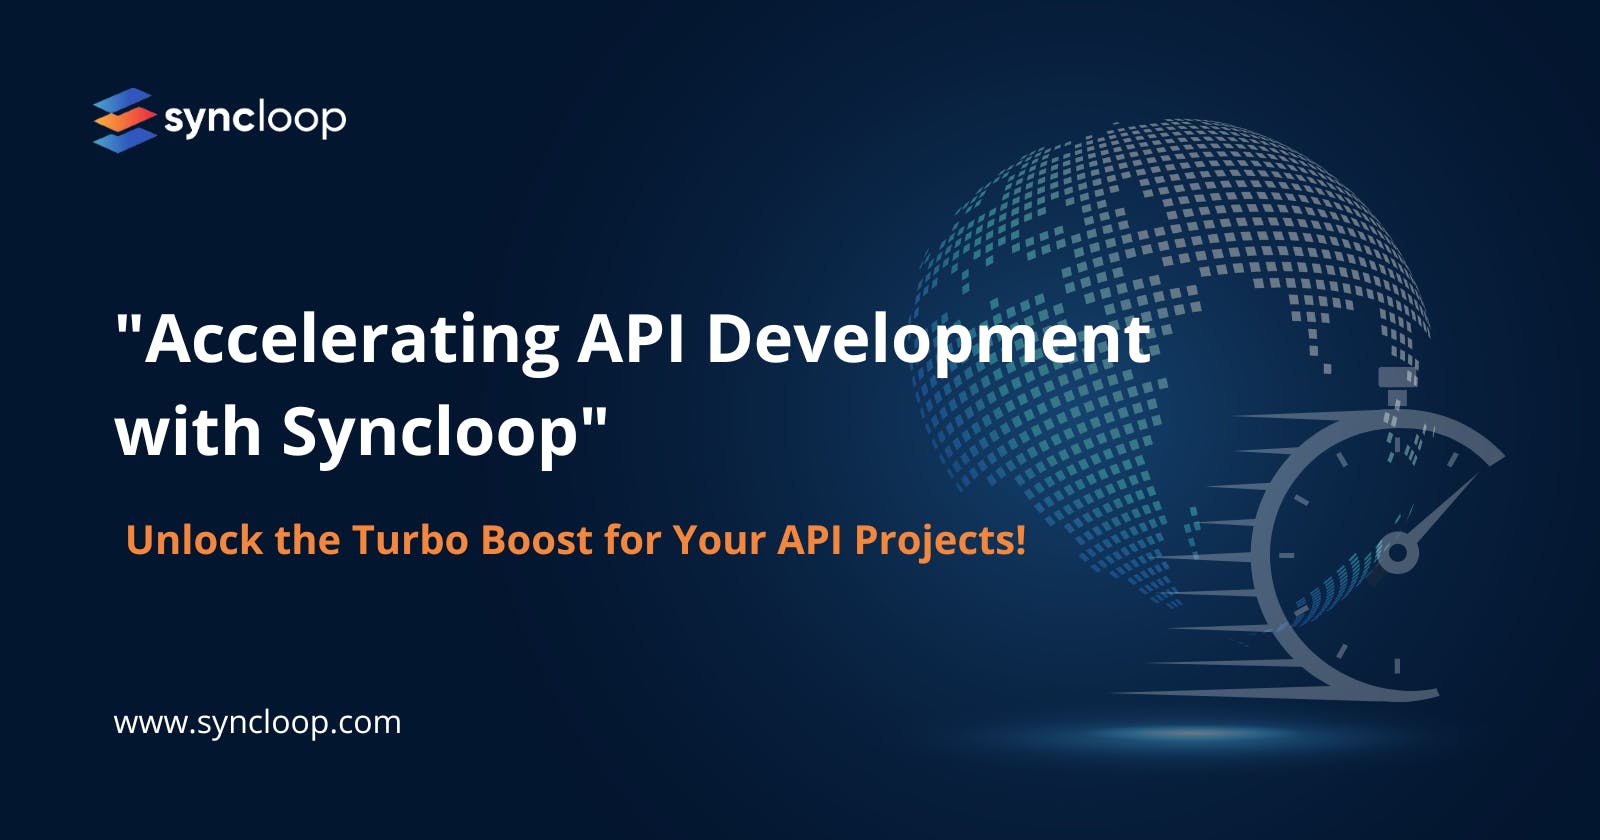 Accelerating API Development with Syncloop